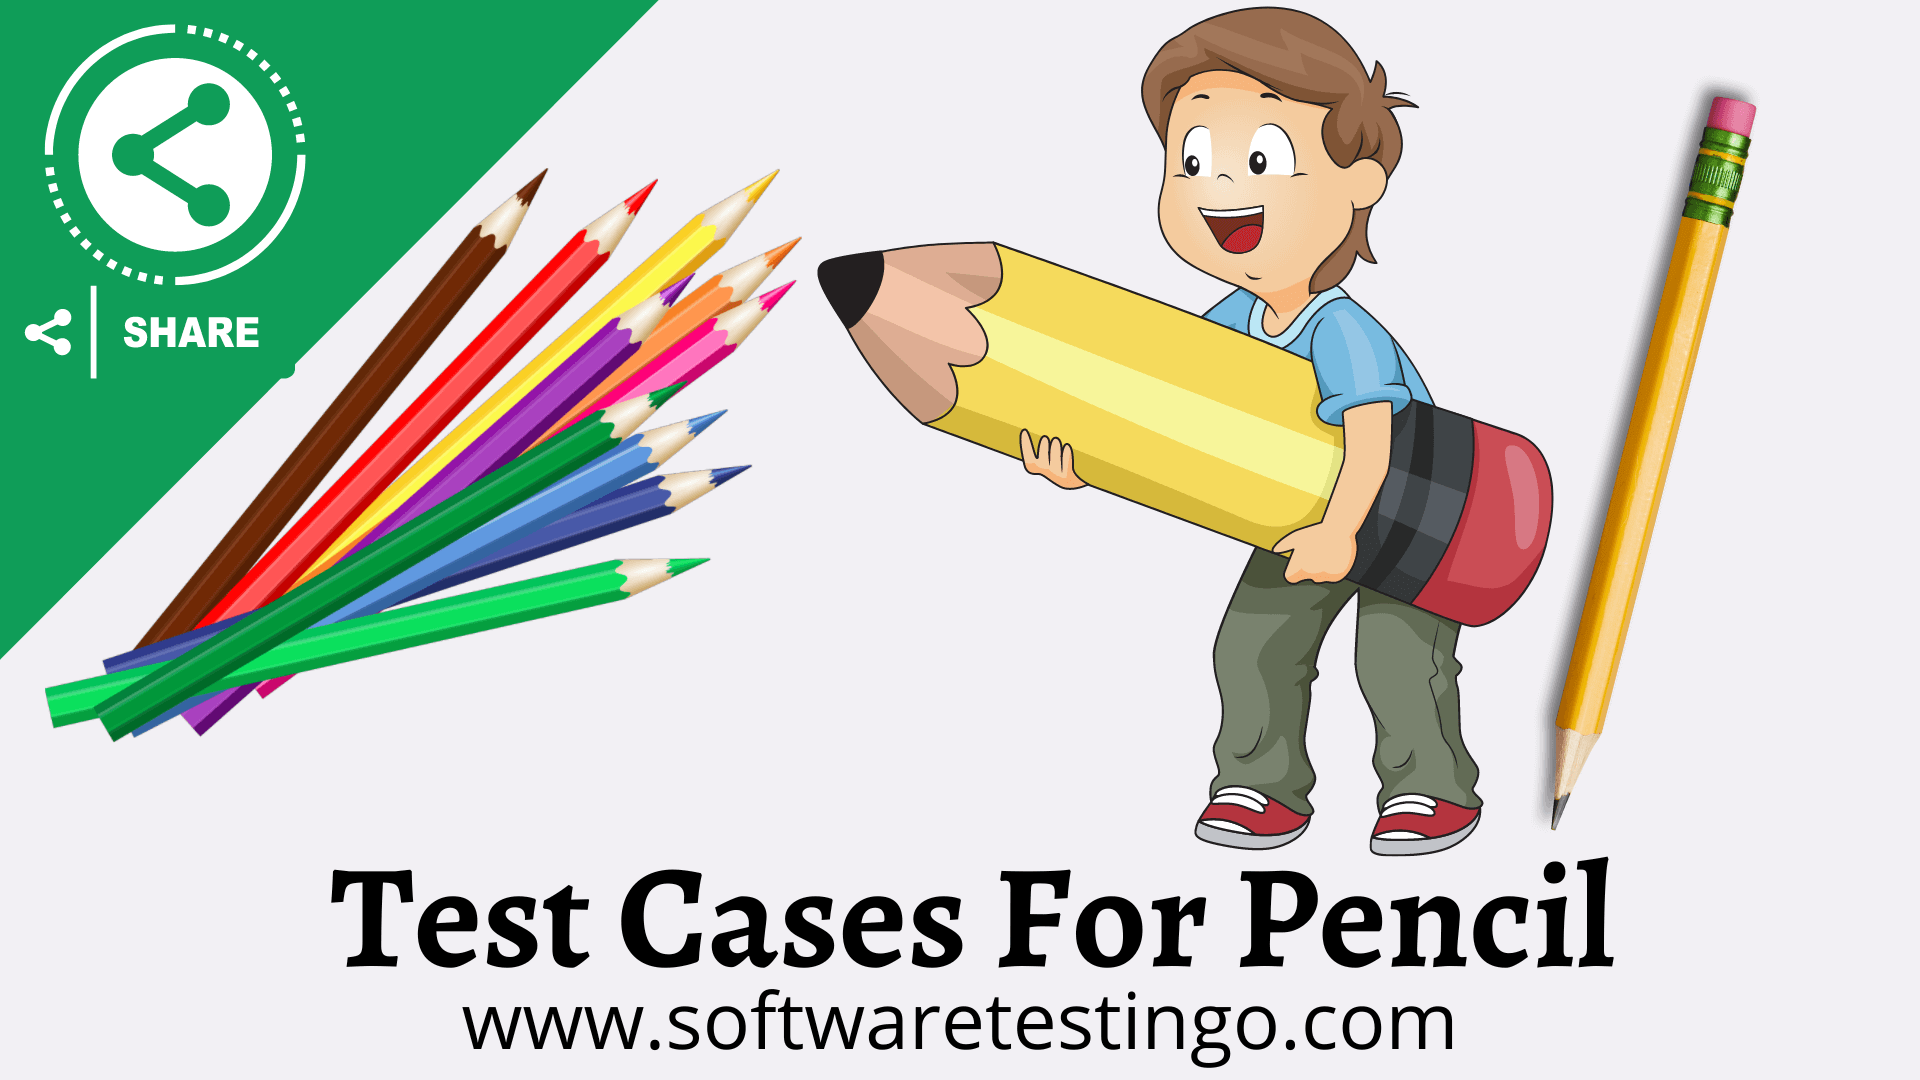 Test Cases For Pencil